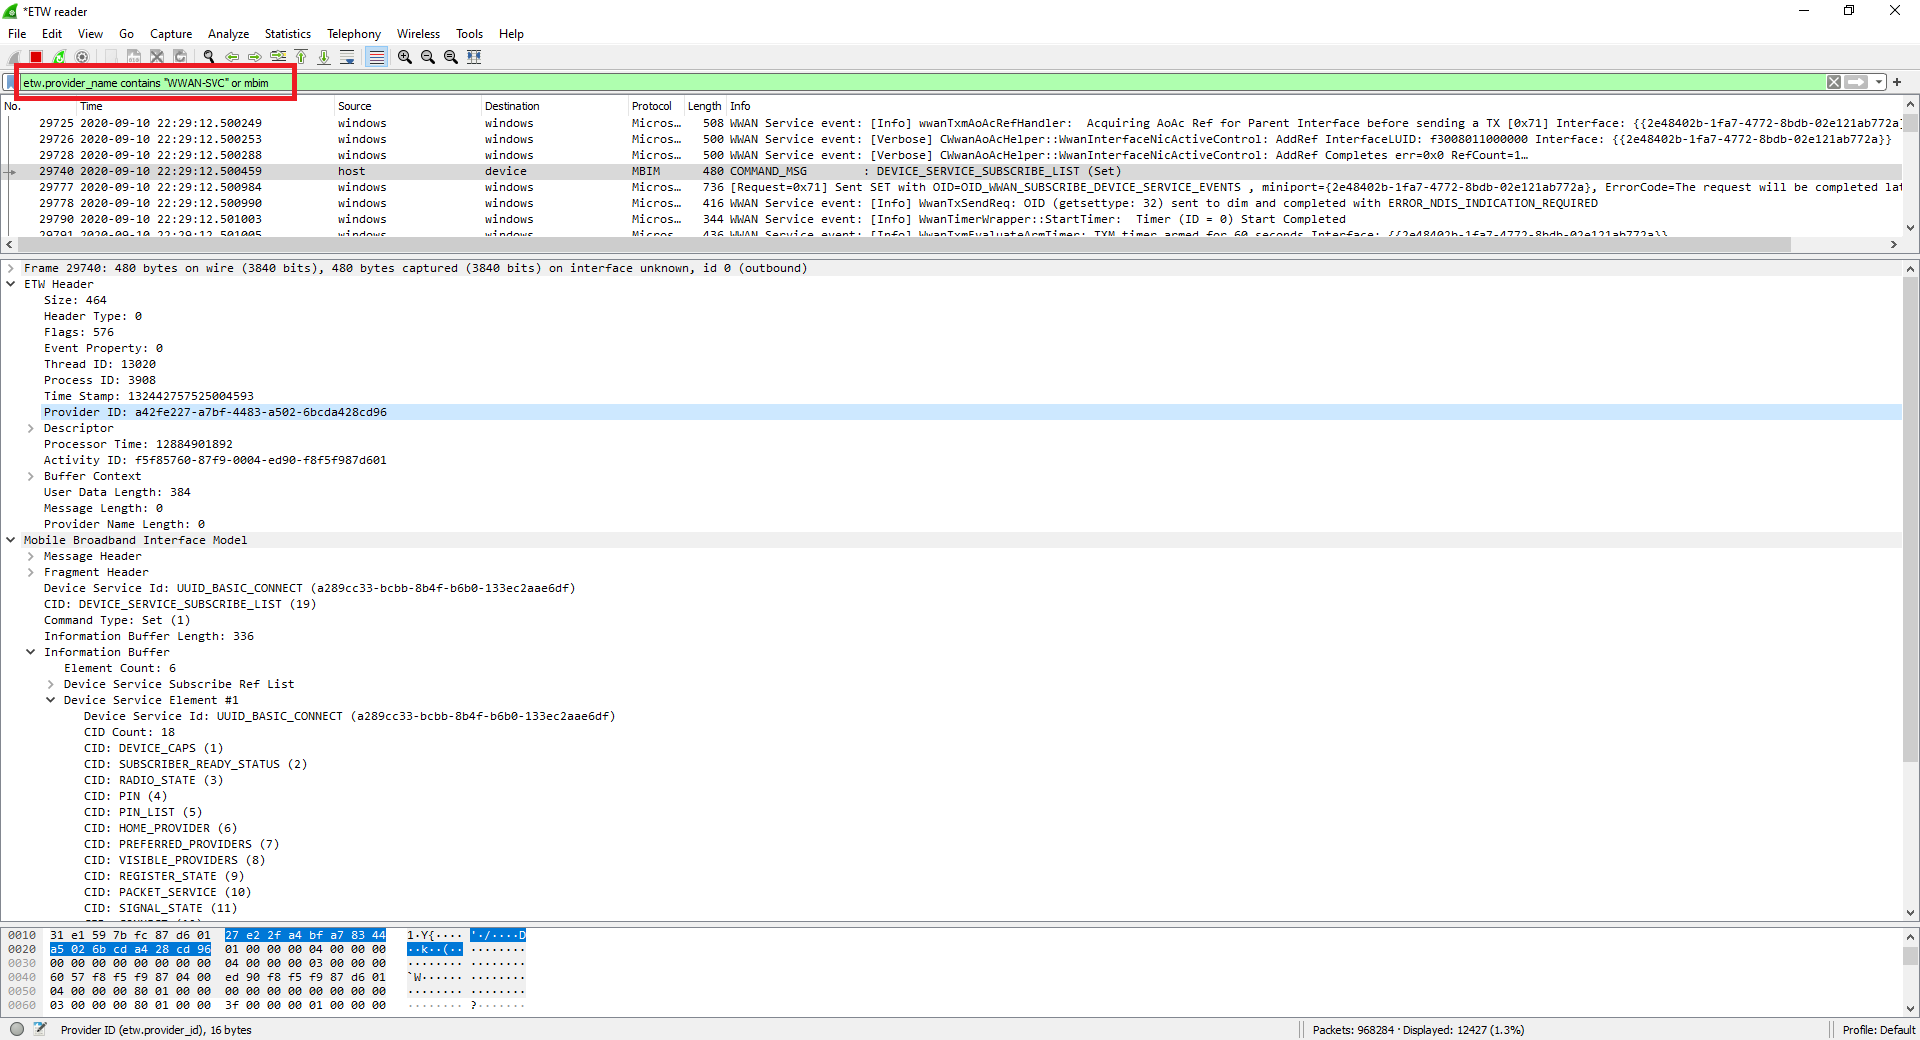 Screenshot of Wireshark displaying decoded ETW and MBIM messages with filters applied.